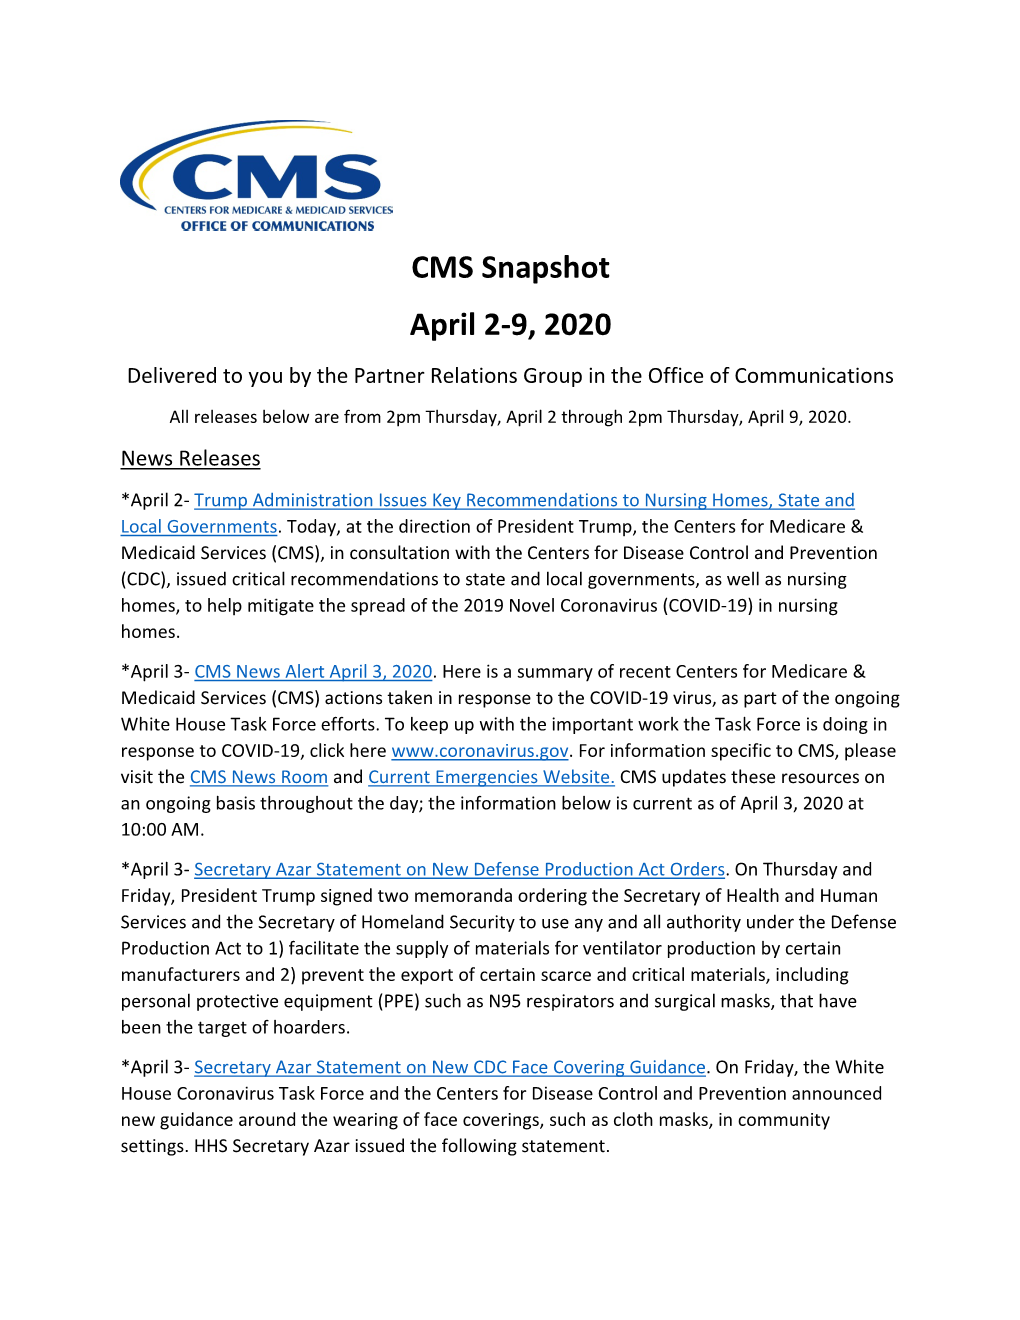 CMS Snapshot April 2-9, 2020 Delivered to You by the Partner Relations Group in the Office of Communications